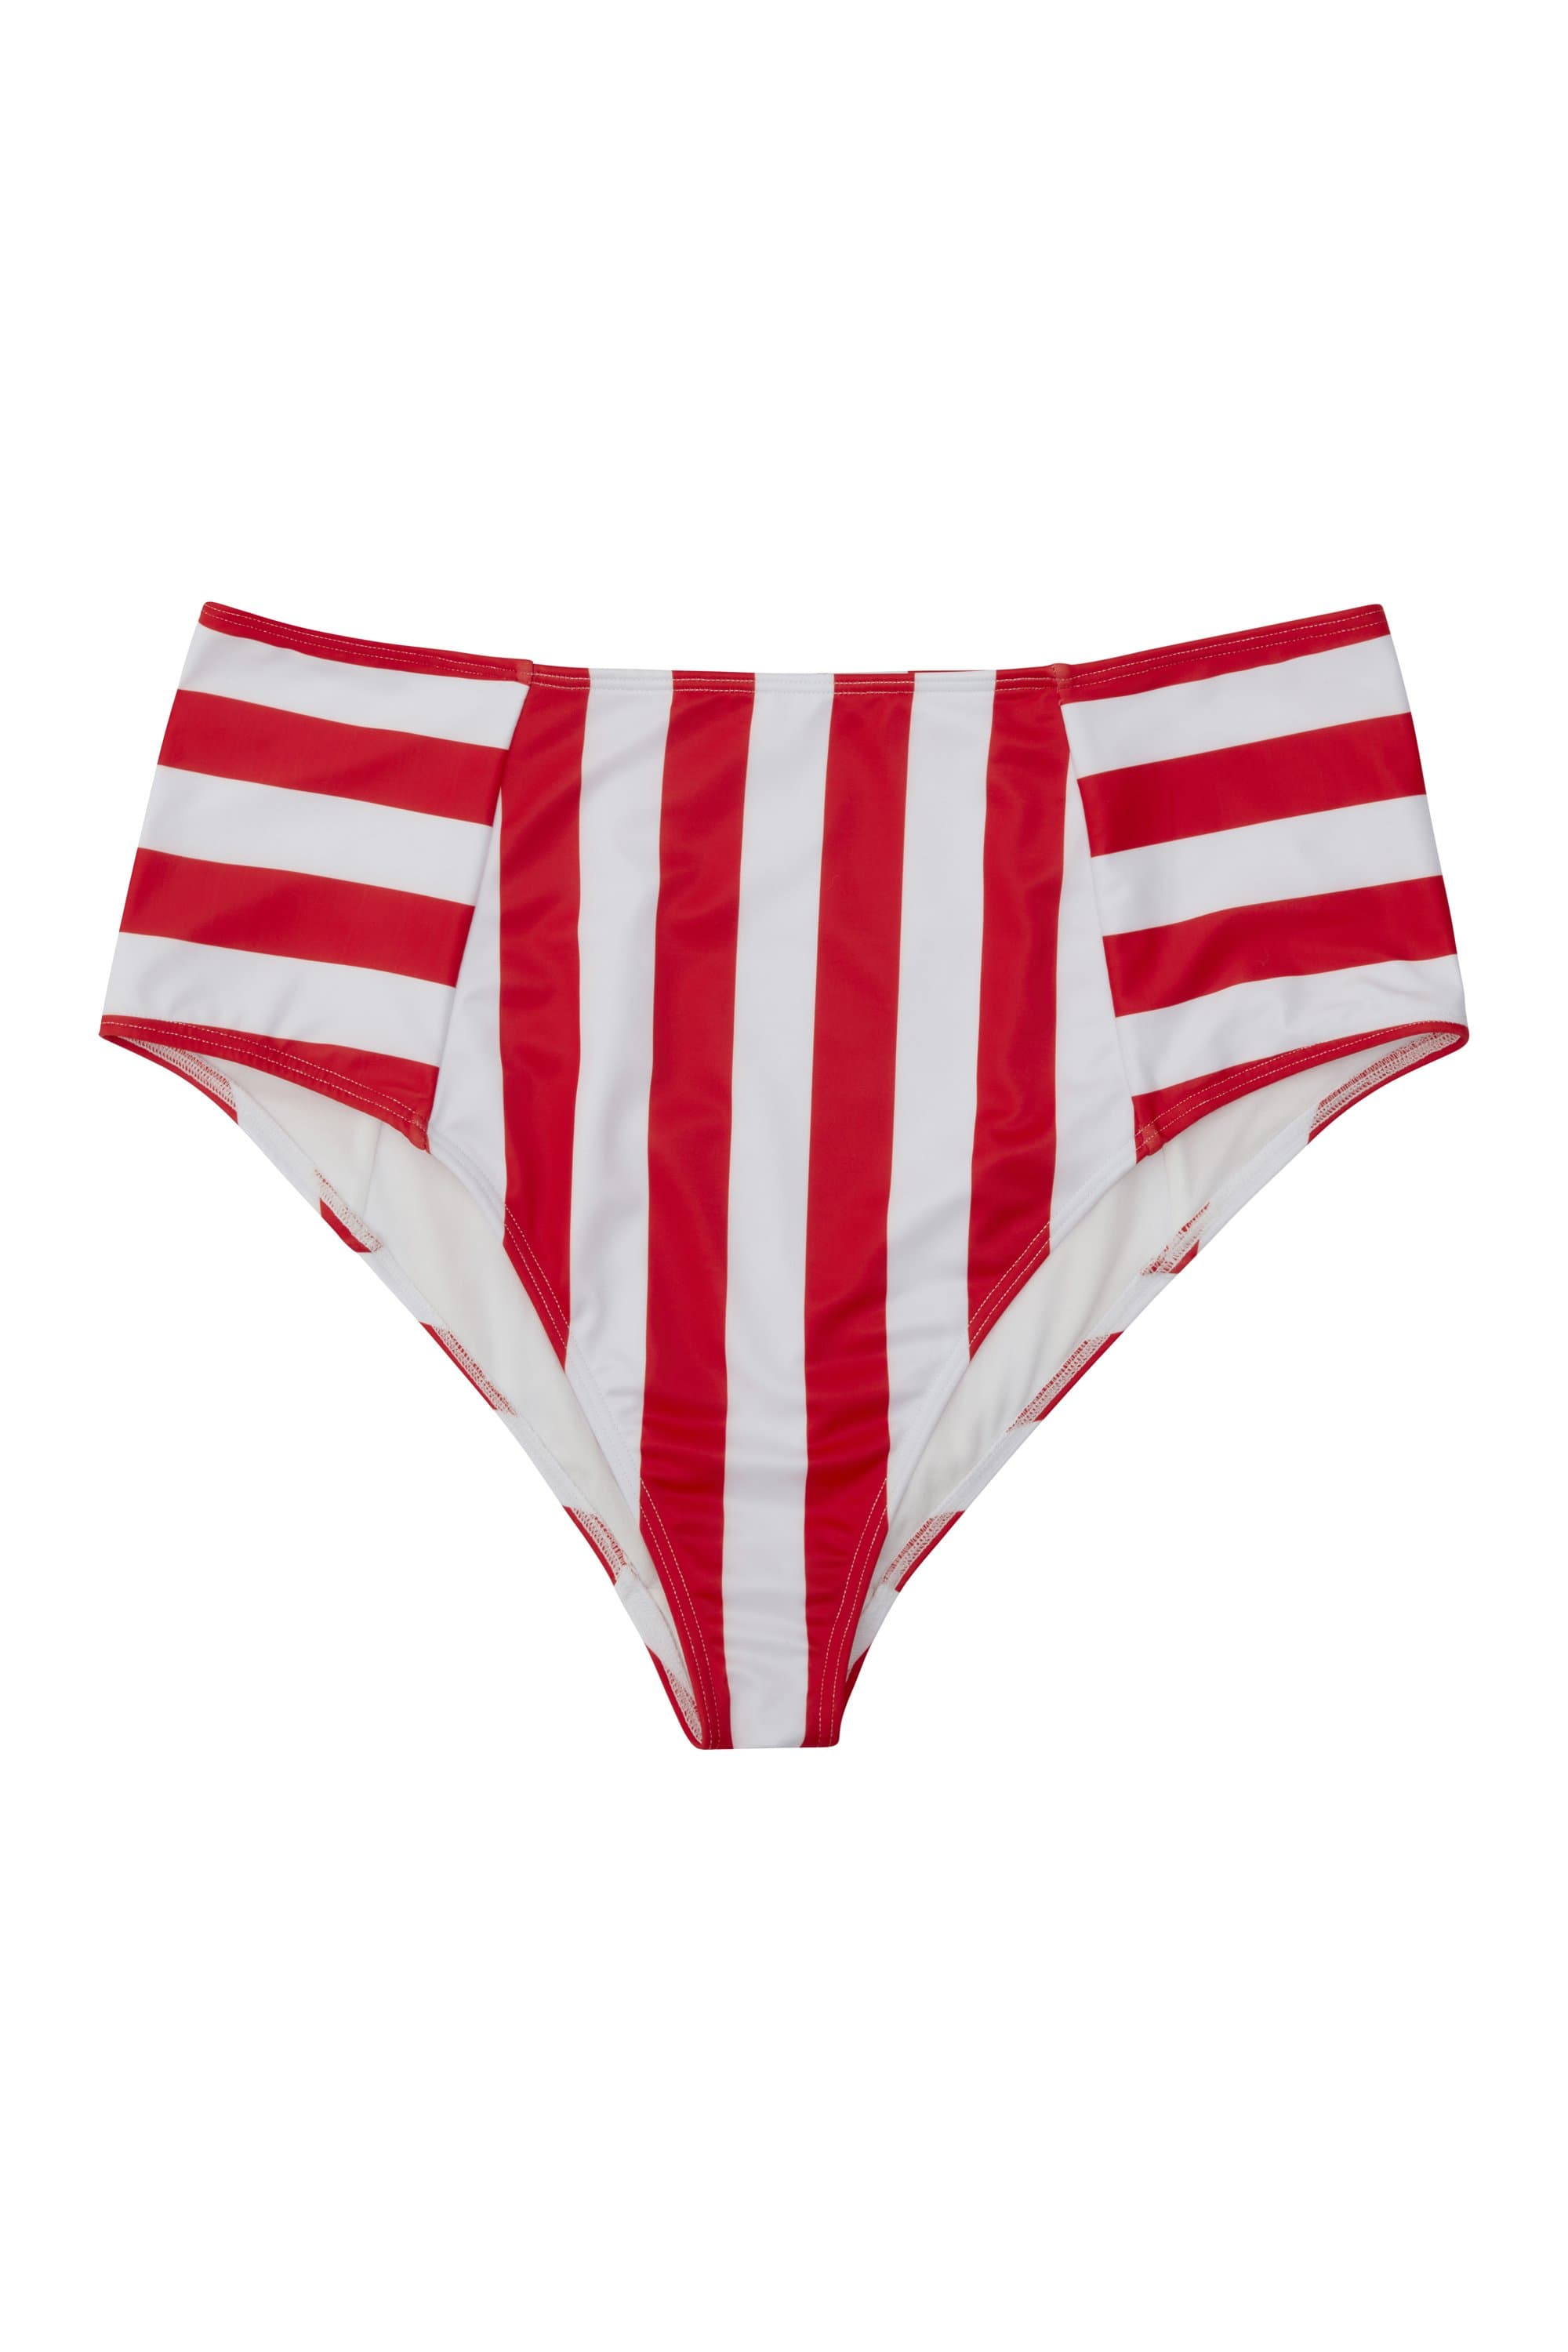 Wolf & Whistle Eco Stripe high waist pant red/white Curve